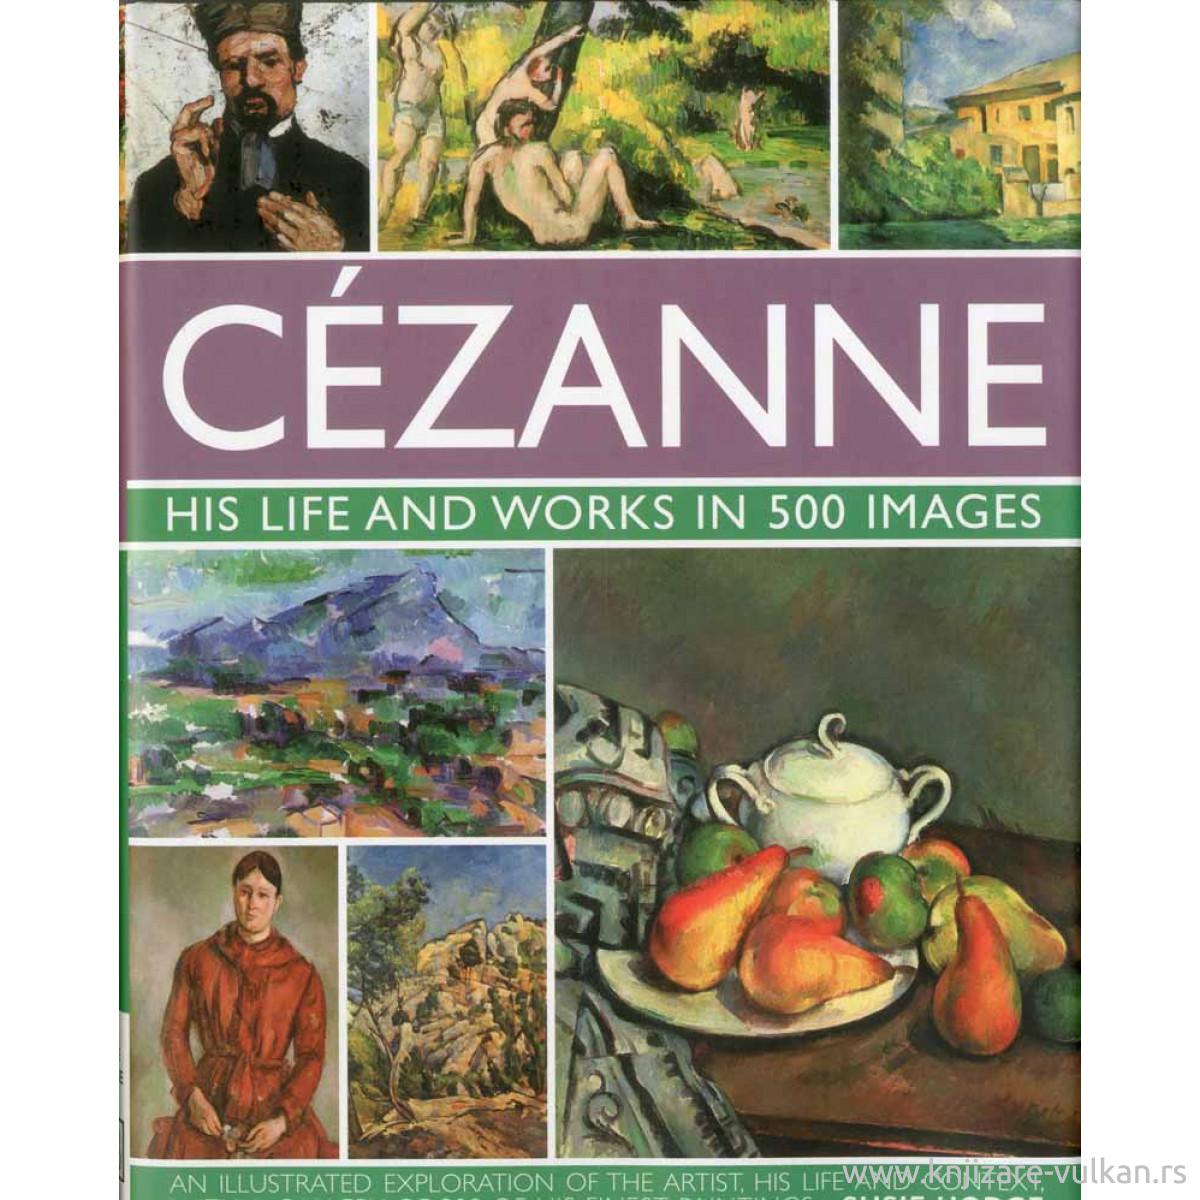 The life & works of cezanne